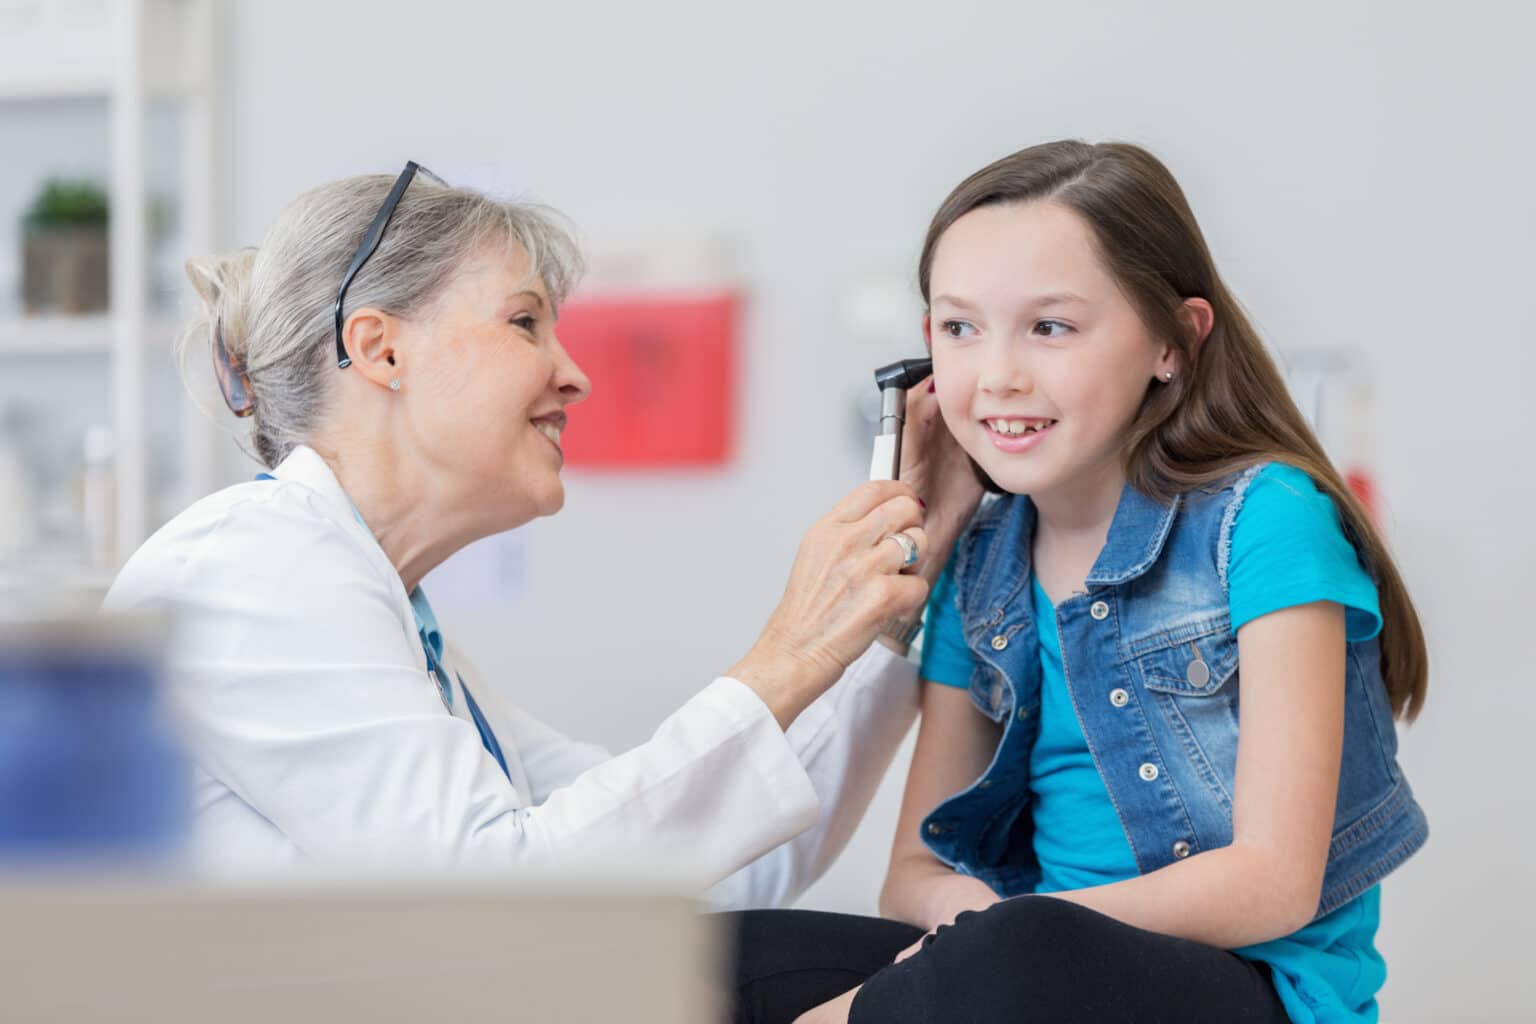 Cheerful senior pediatrician uses an otoscope to check patient's ear during medical examination.